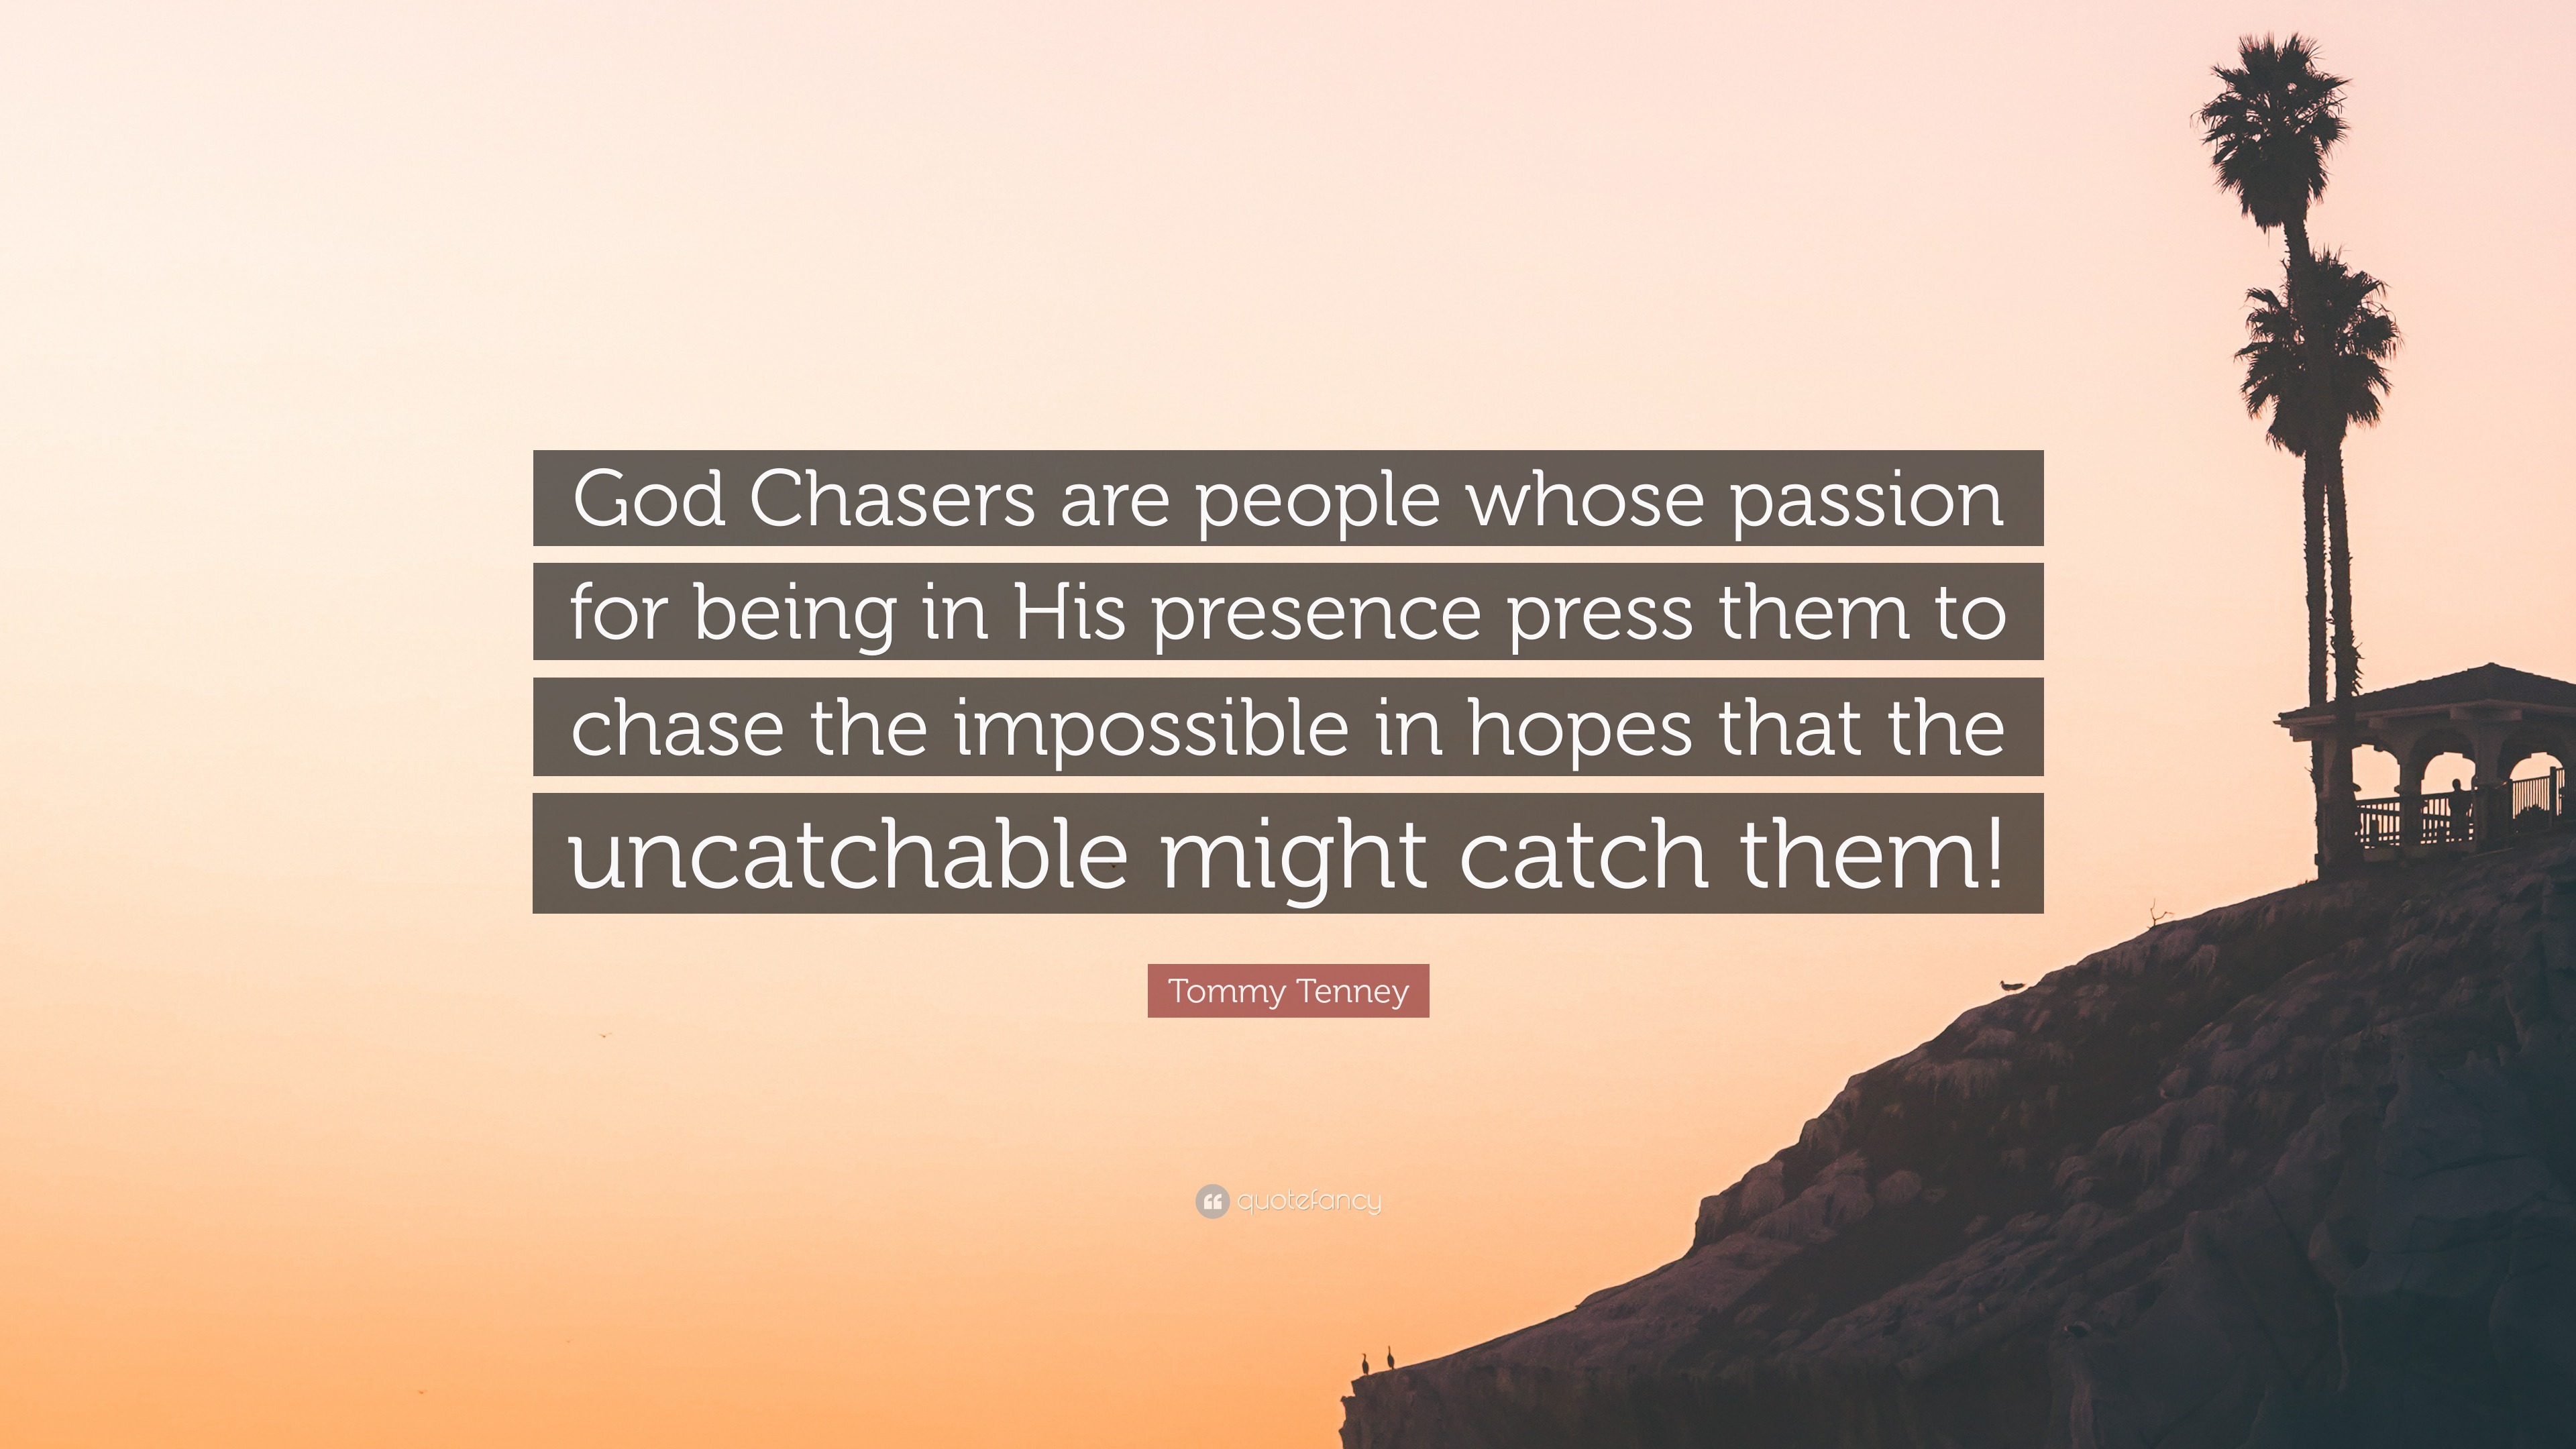 4883880 Tommy Tenney Quote God Chasers are people whose passion for being